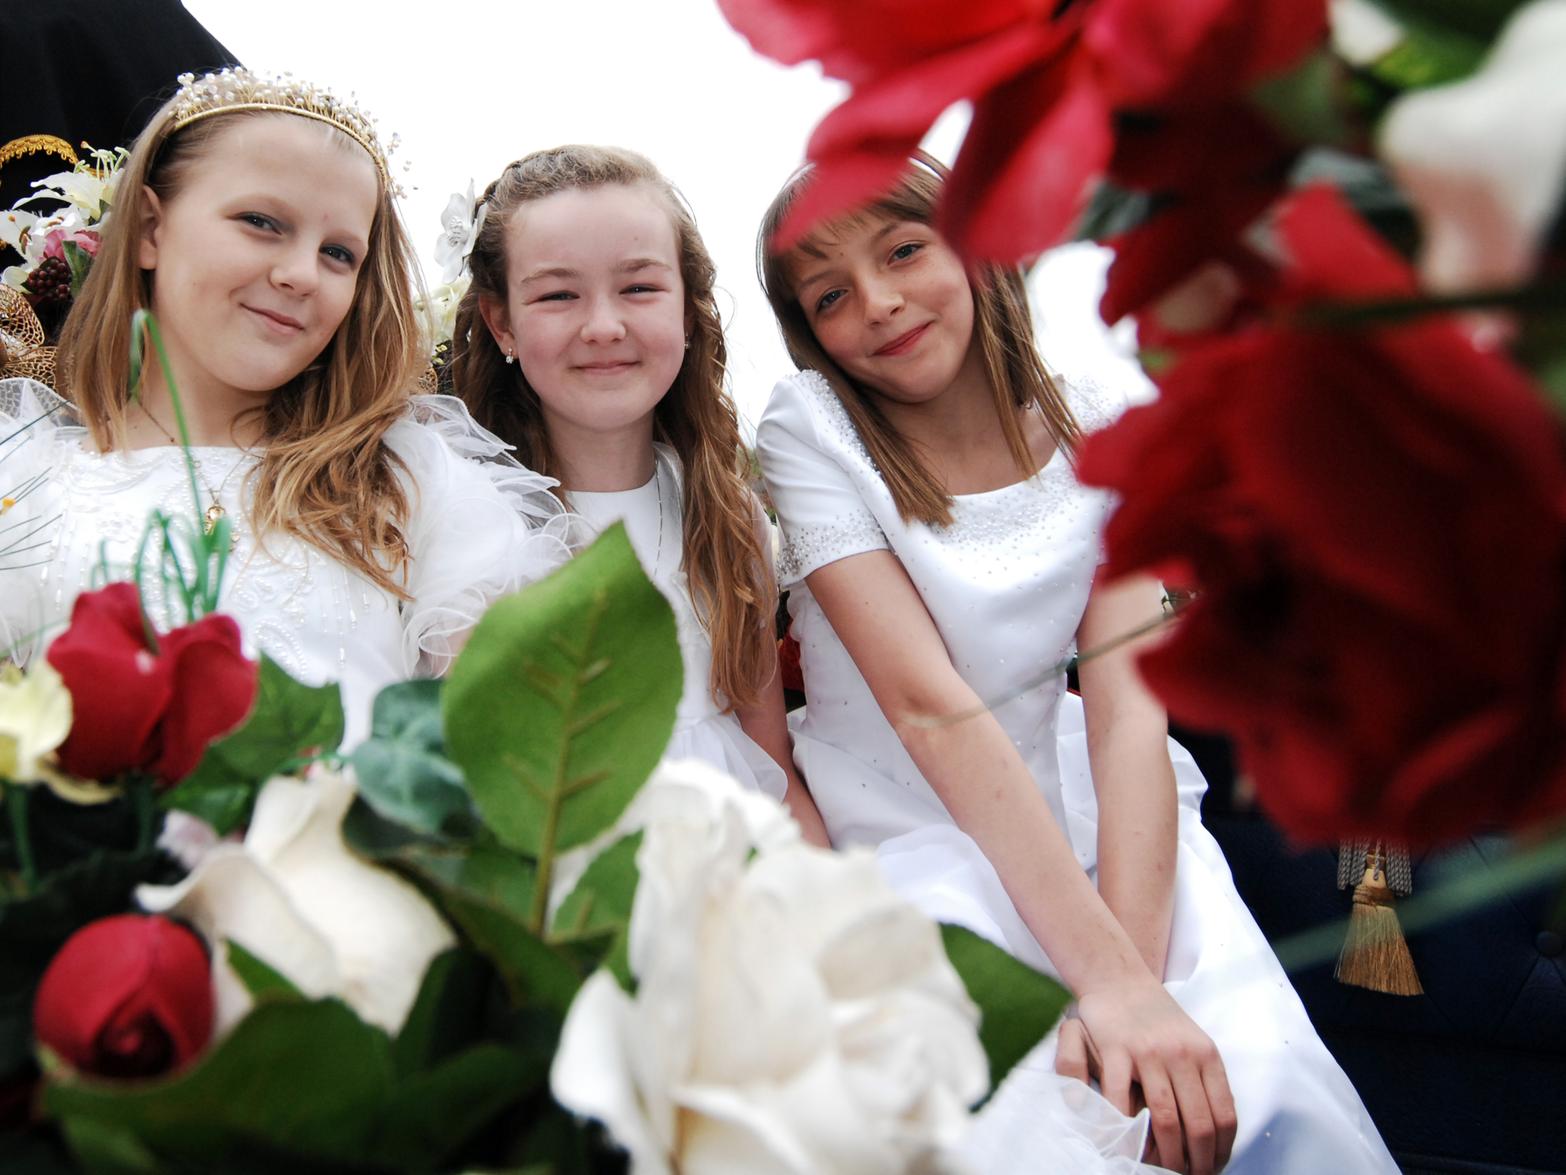 Halton Moor May Queen Serena Sissons (left) with her attendants Niamh Ryan (centre) and Kerry Chappelow, outside Halton Moor WMC.